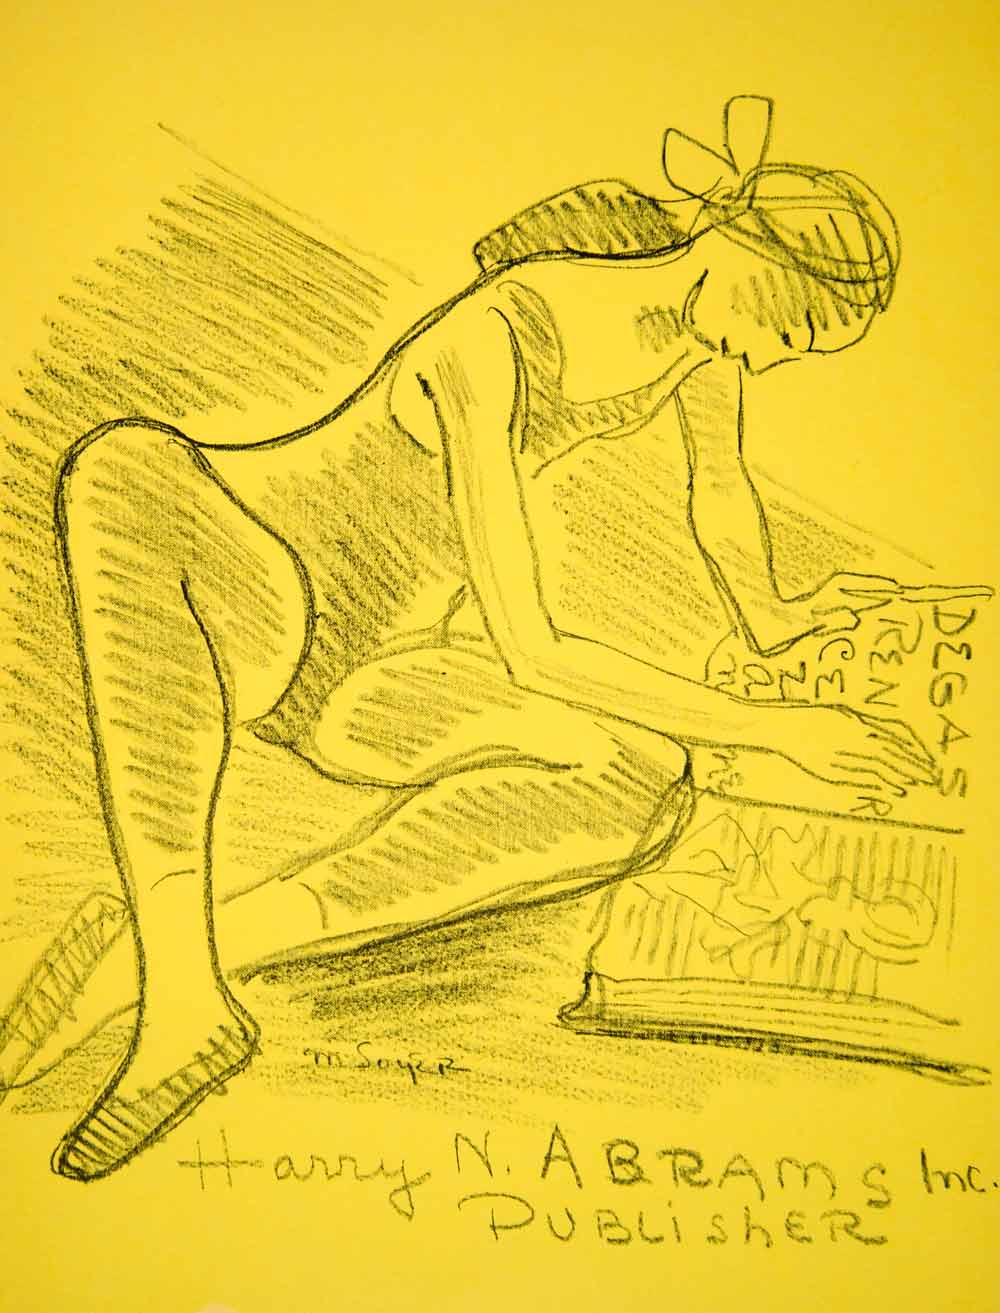 1954 Lithograph Moses Soyer Art Harry N. Abrams Publisher New York City AEFA2